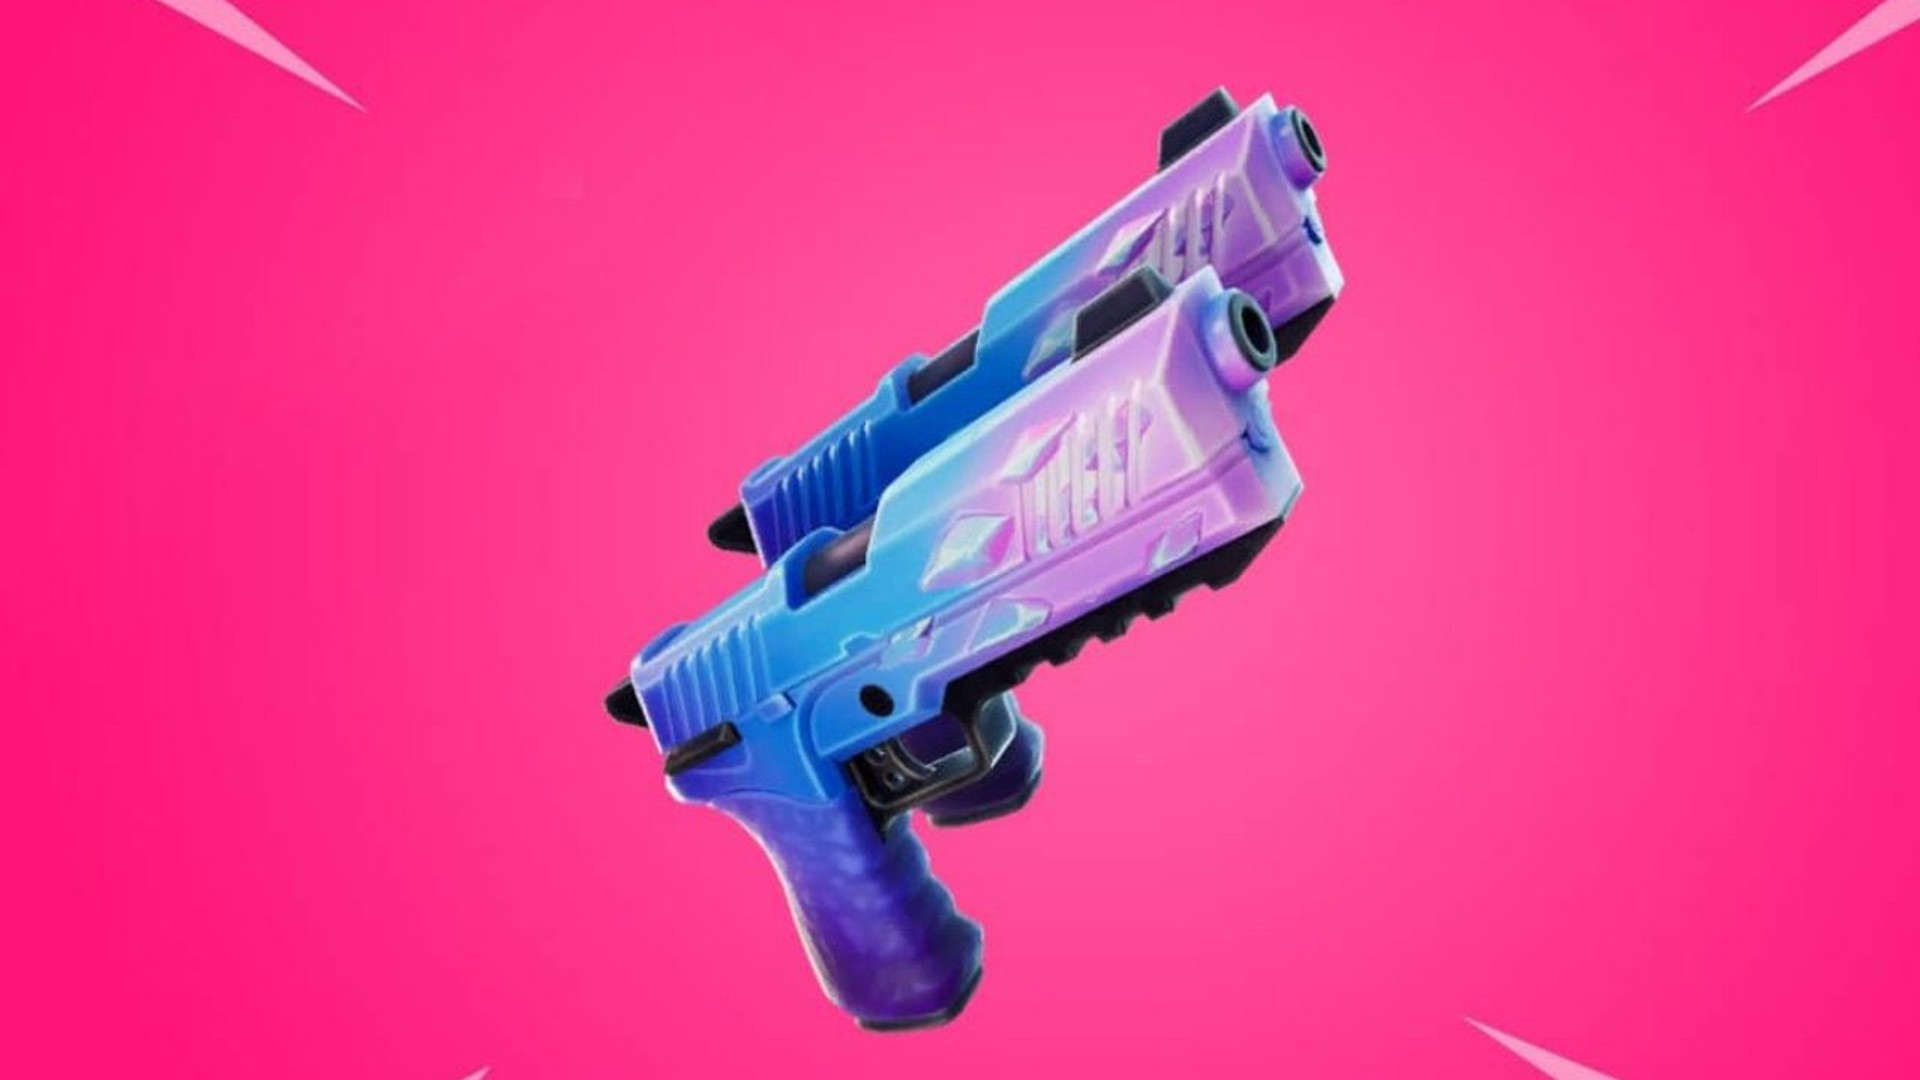  Where to find Fortnite's exotic weapons 